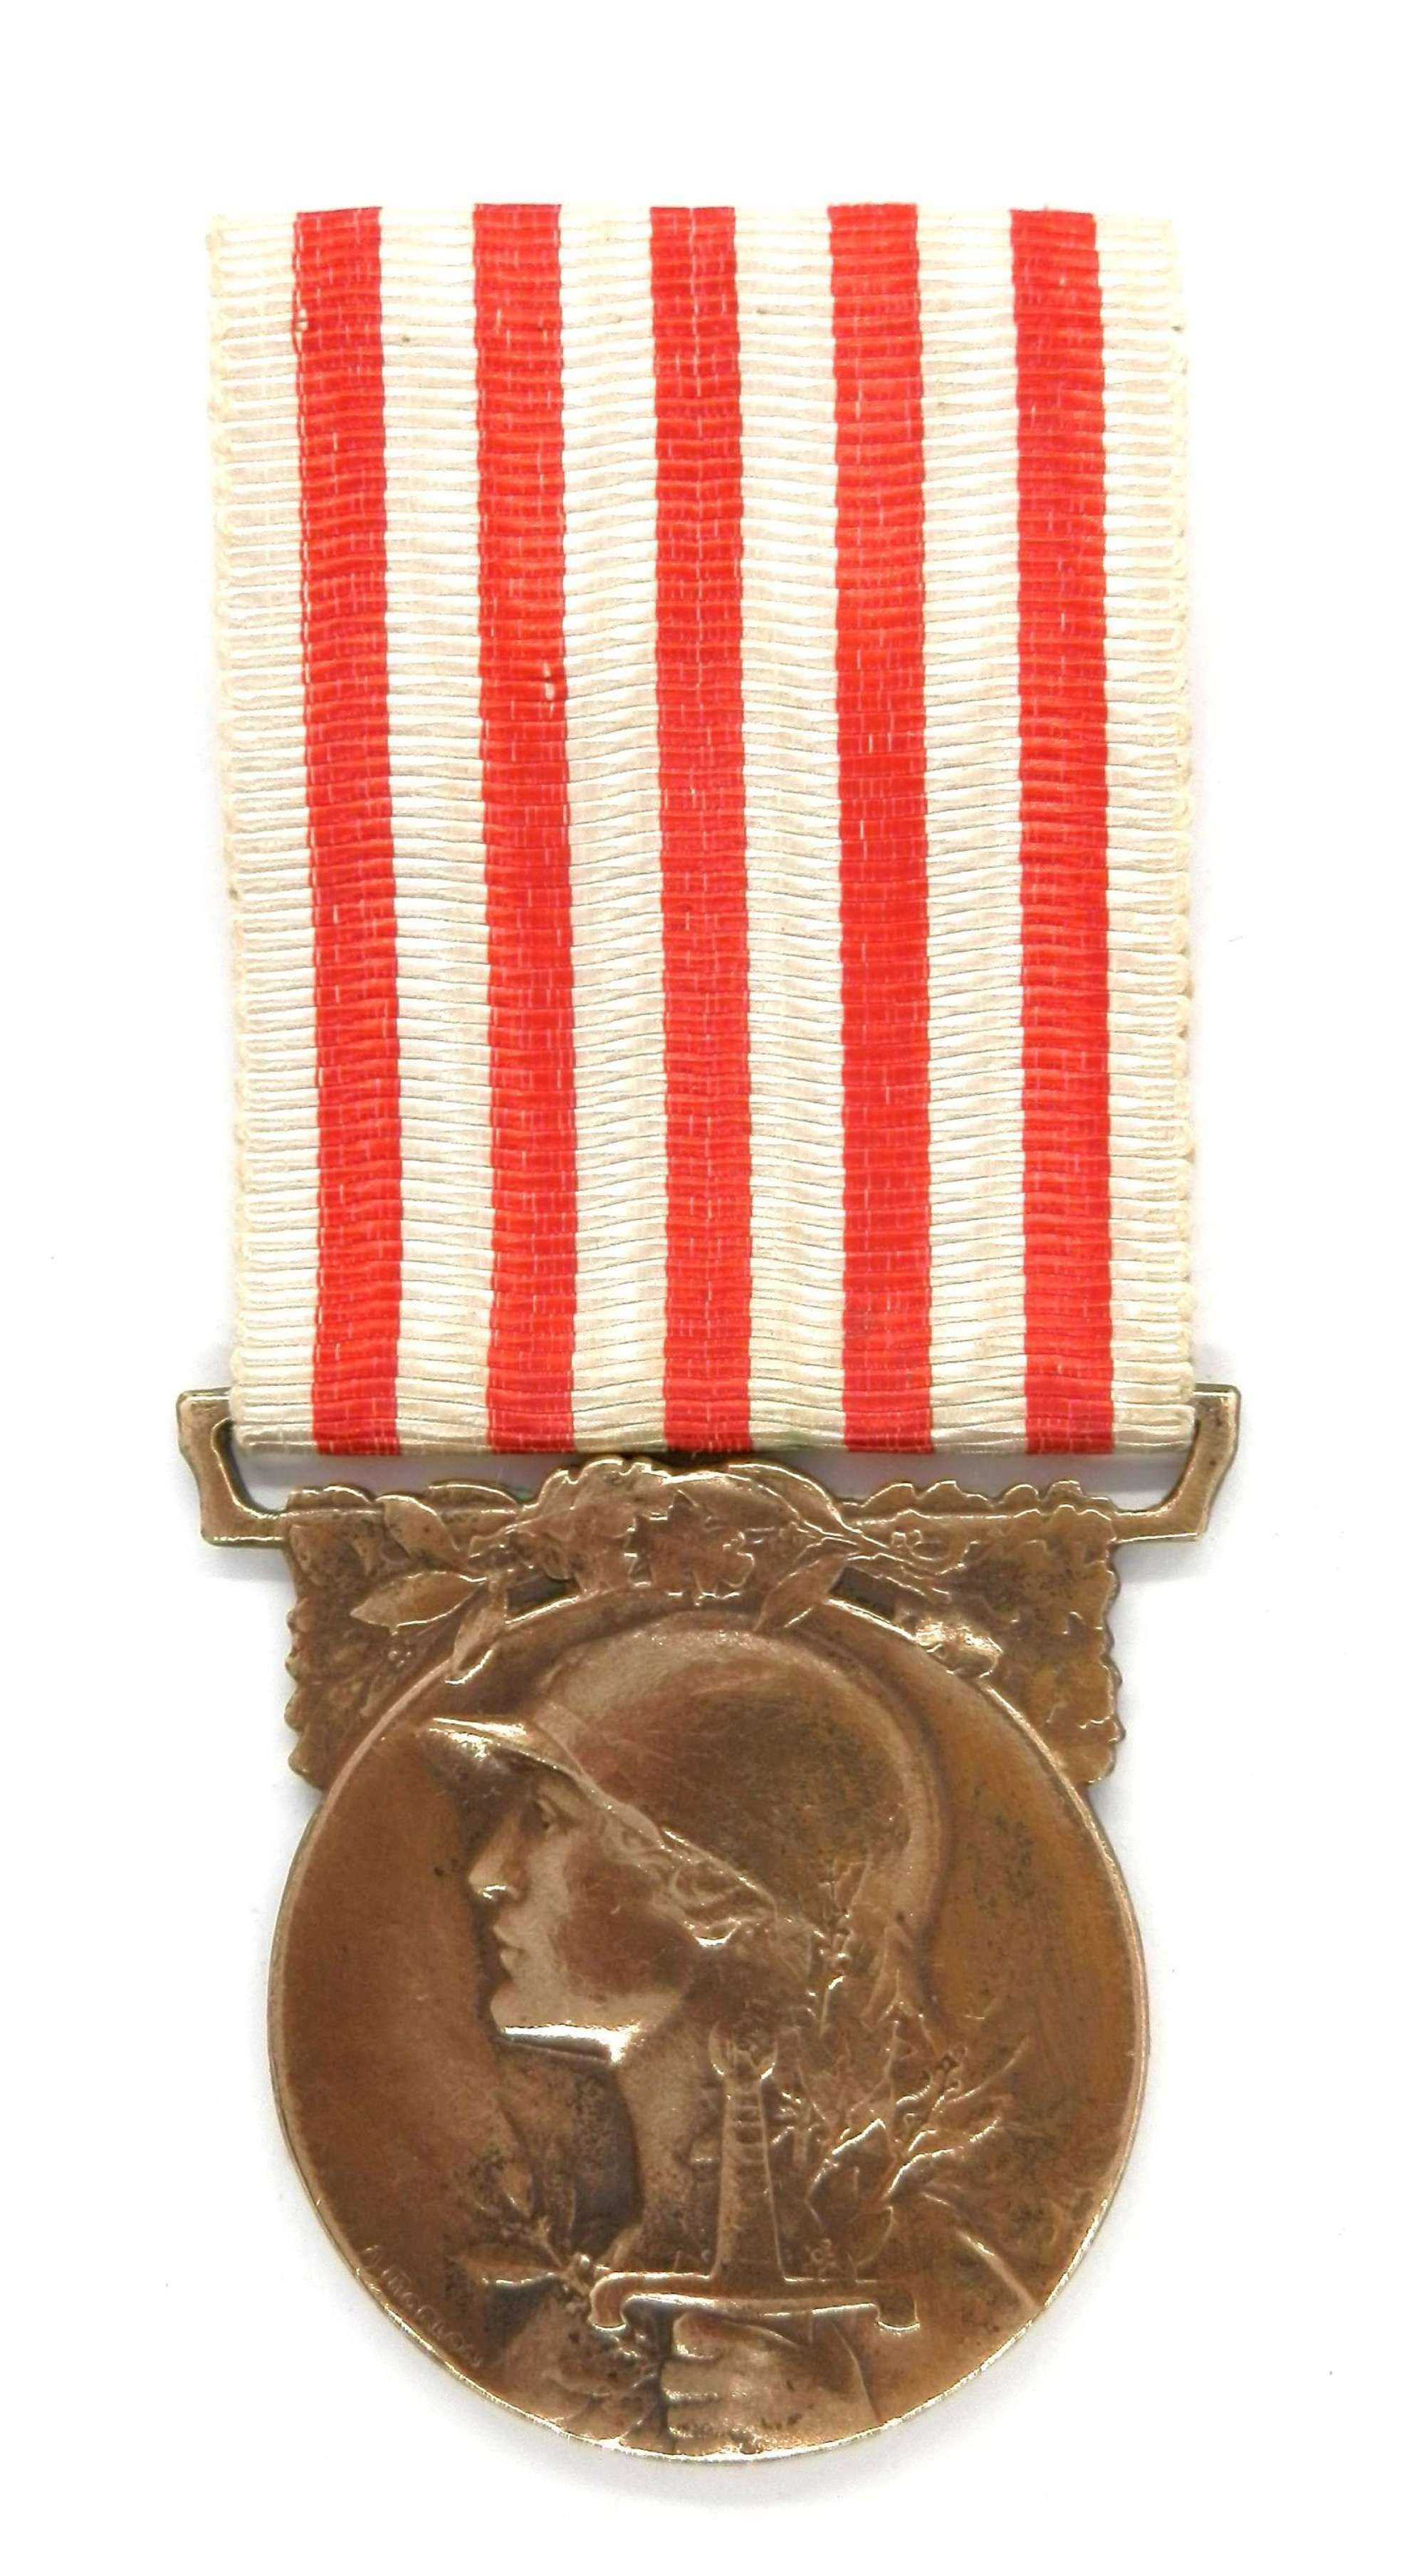 French Commemorative Medal of the Great War.